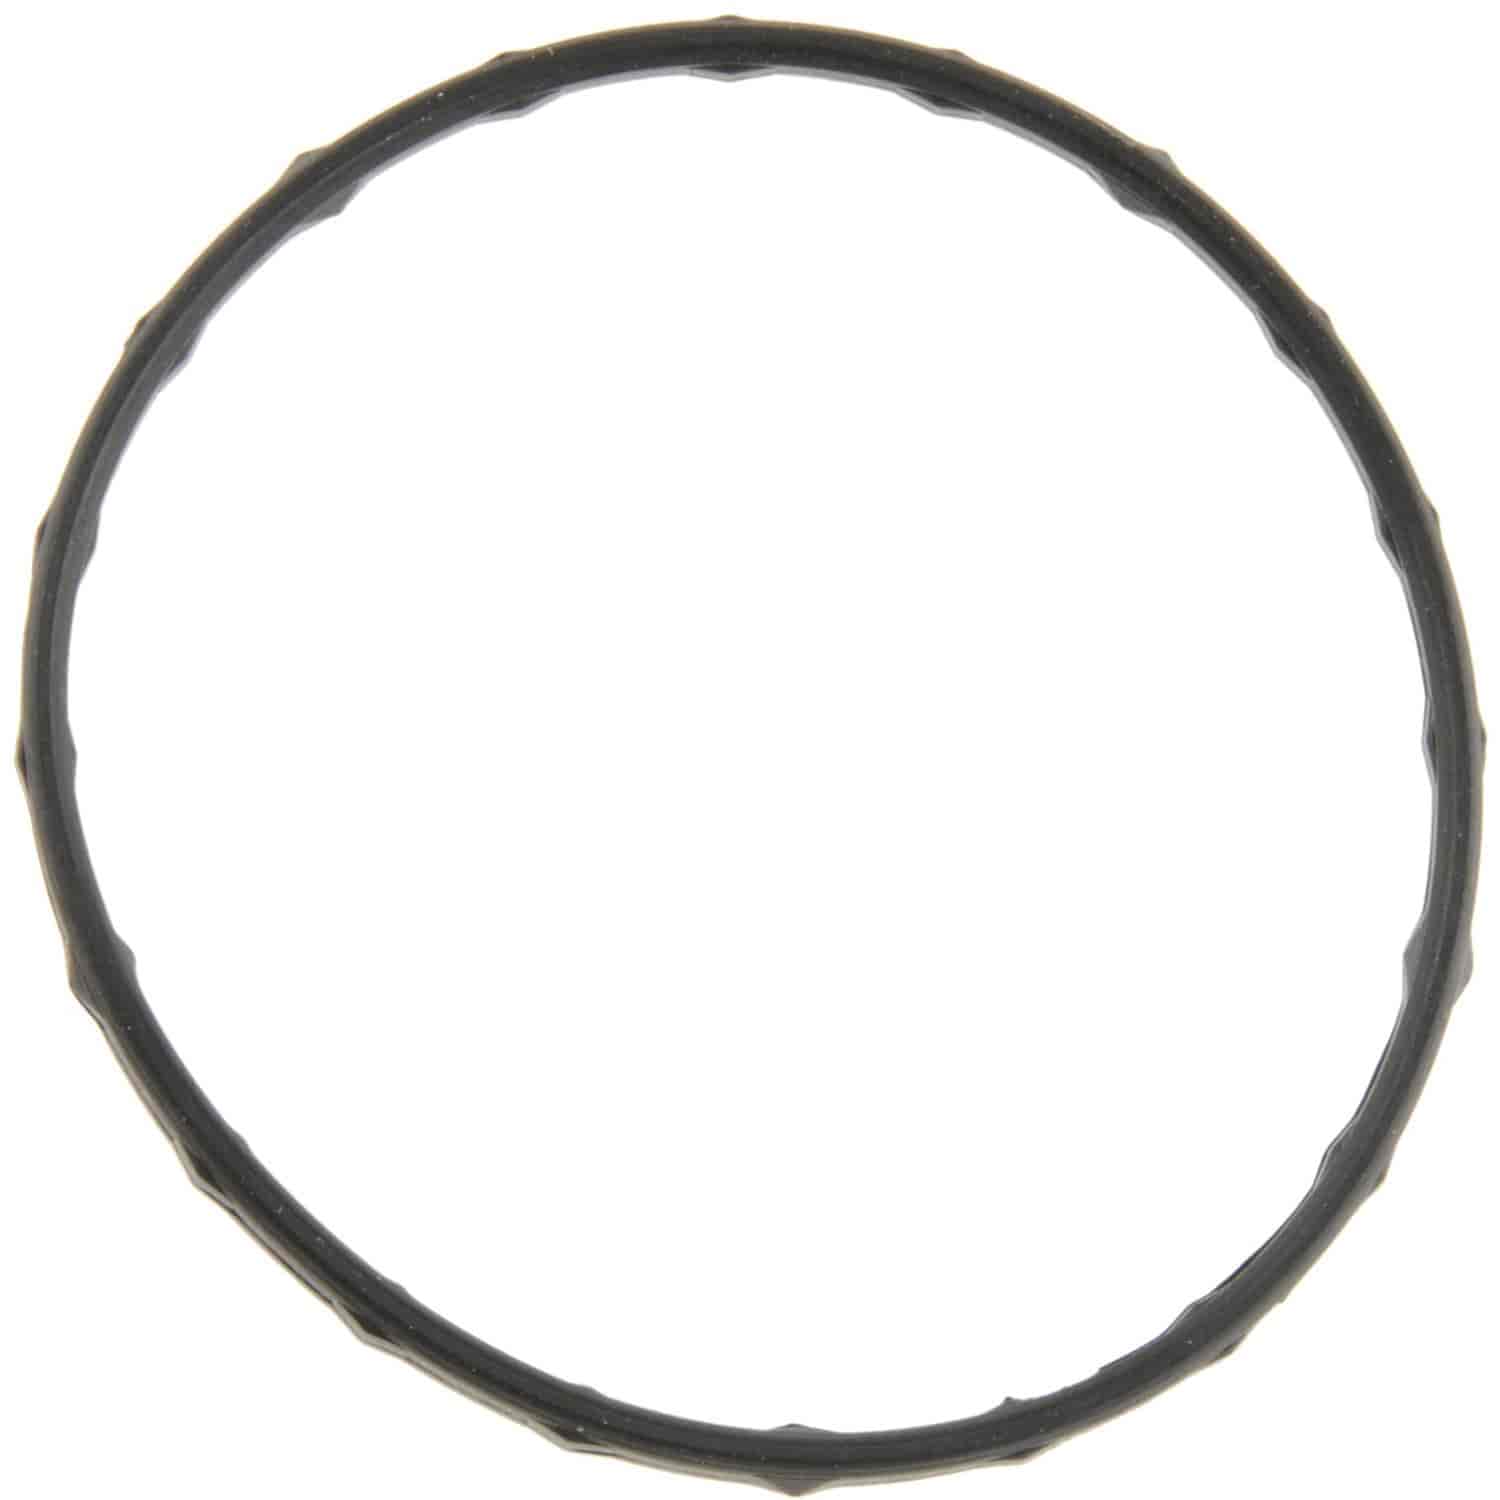 Water Outlet Gasket TOYOTA-TRUCK 4.0L DOHC 1GRFE 2003-2008